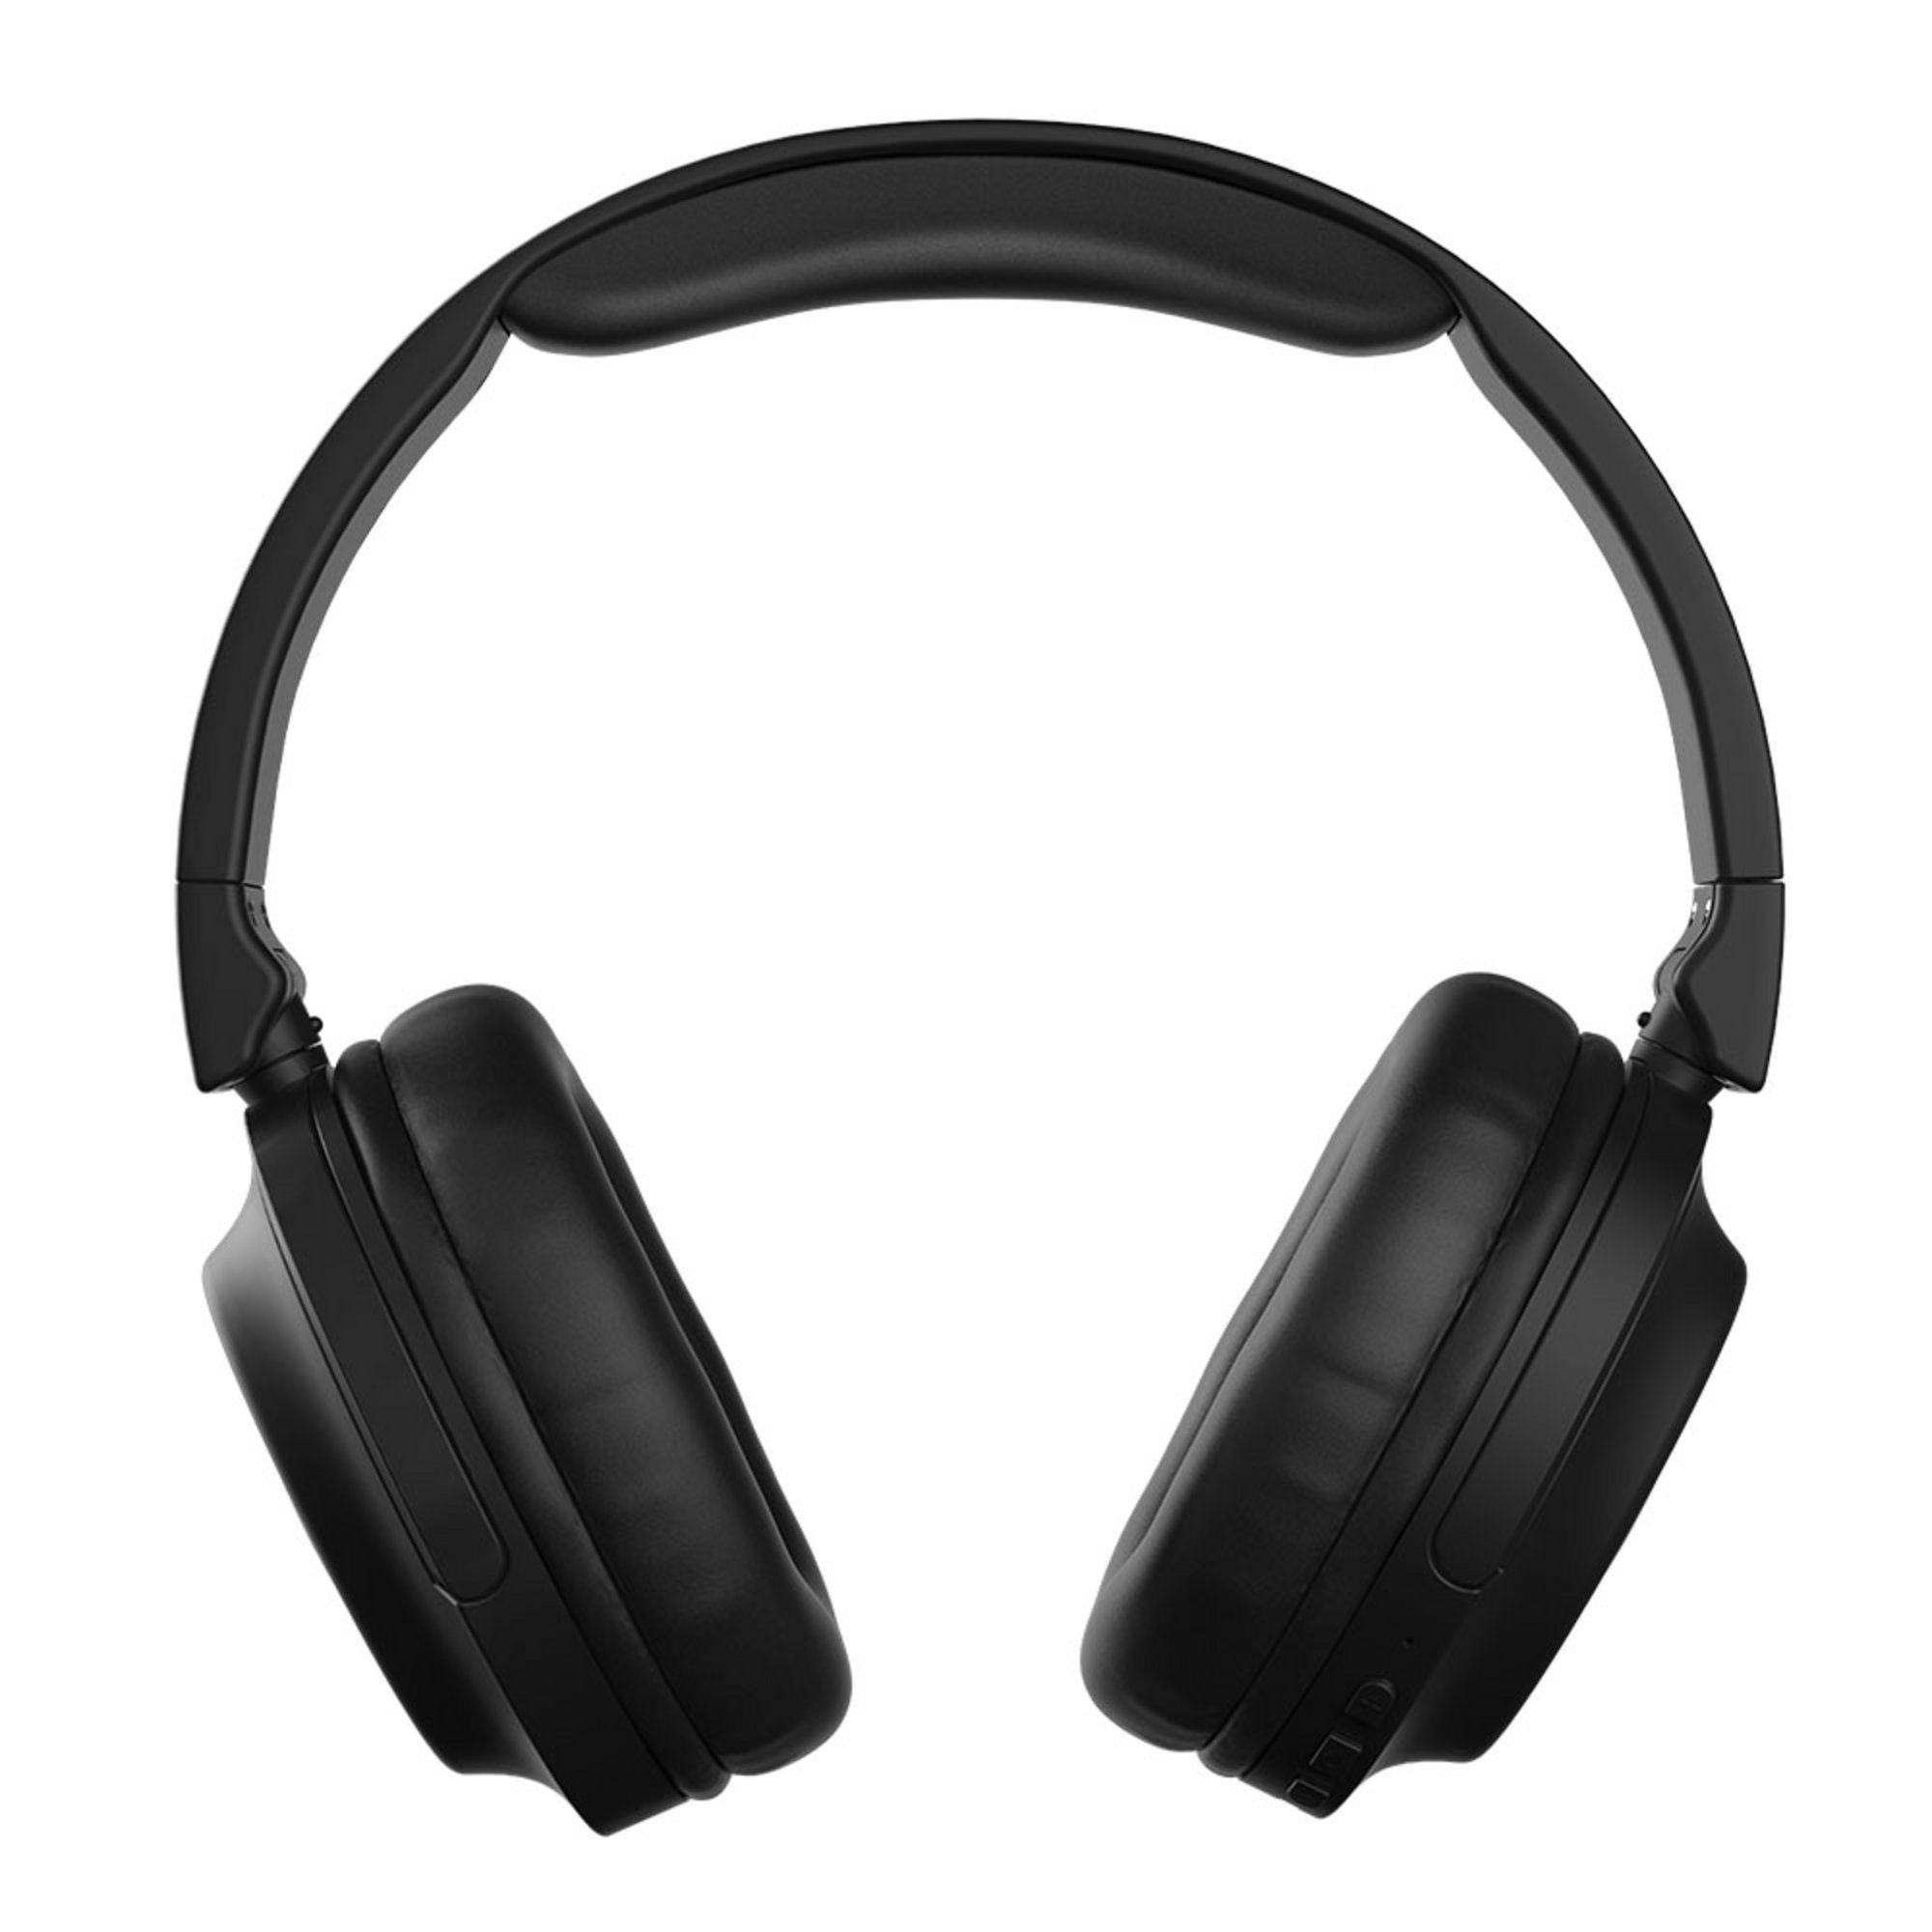 View more Edge 50 Wireless Over Ear Headphone details!!